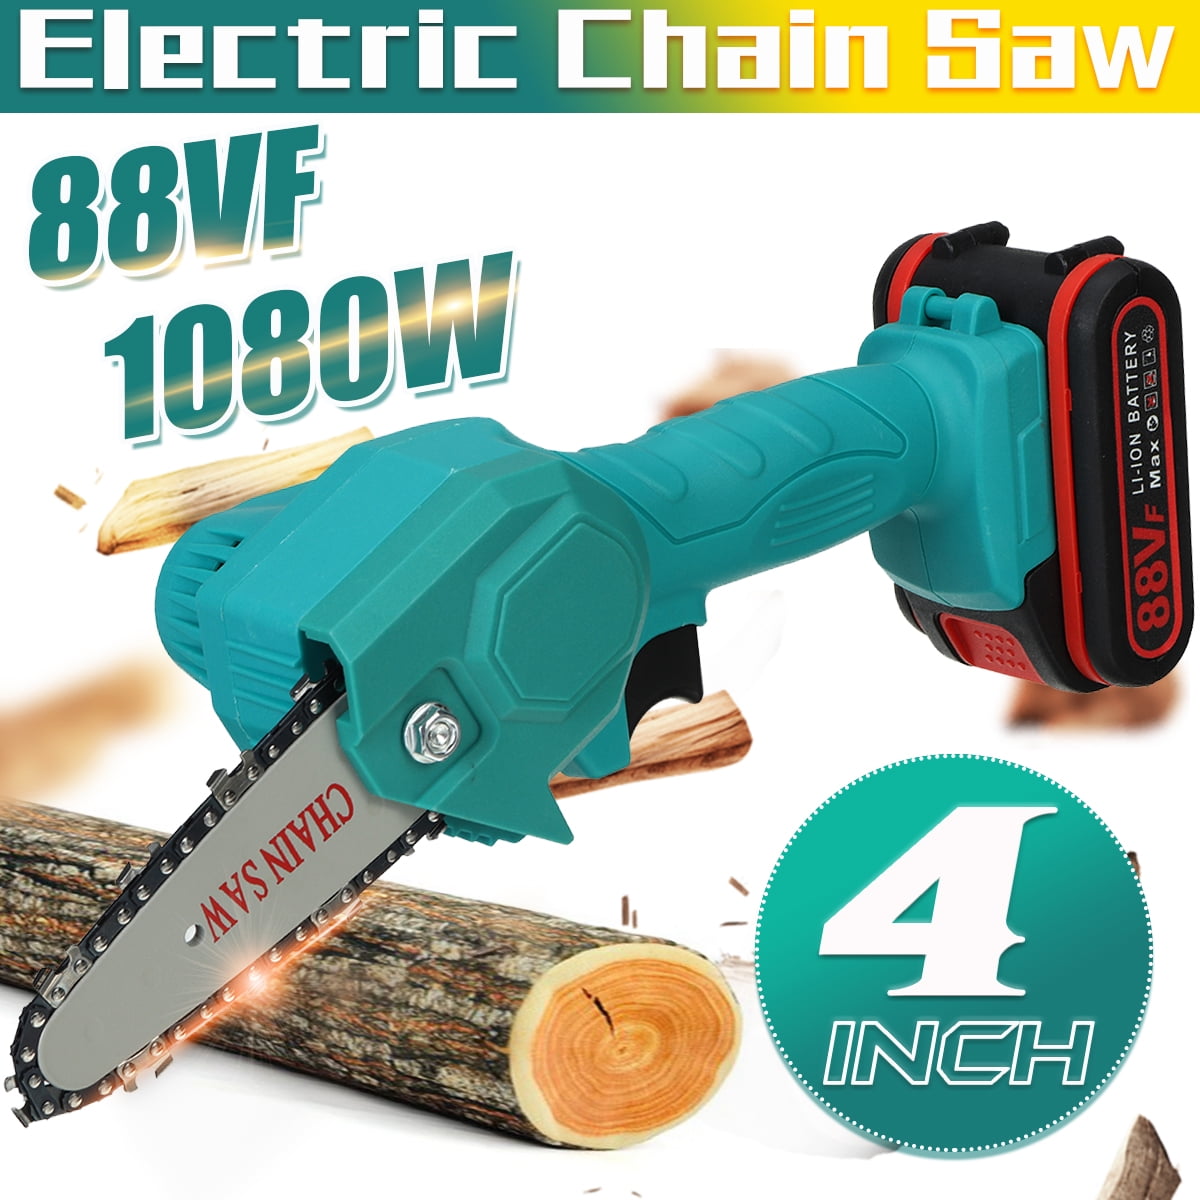 1080W 88V Cordless Mini One-Hand Saw Woodworking Electric Chain Saw Wood Cutter 